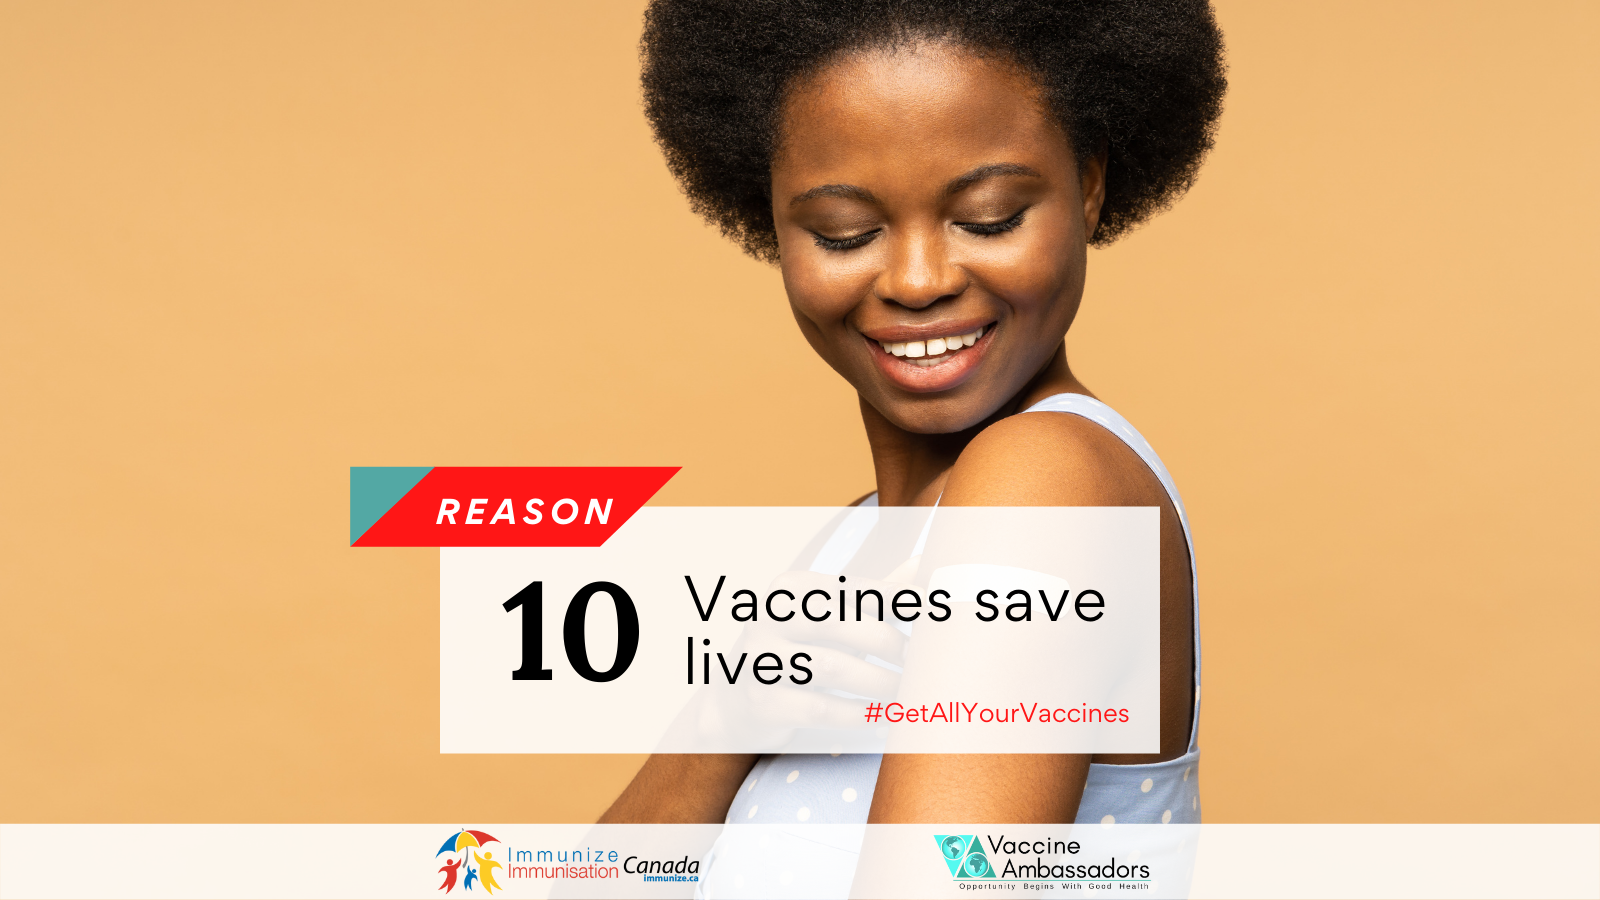 Reason 10 - Vaccines save lives - Twitter